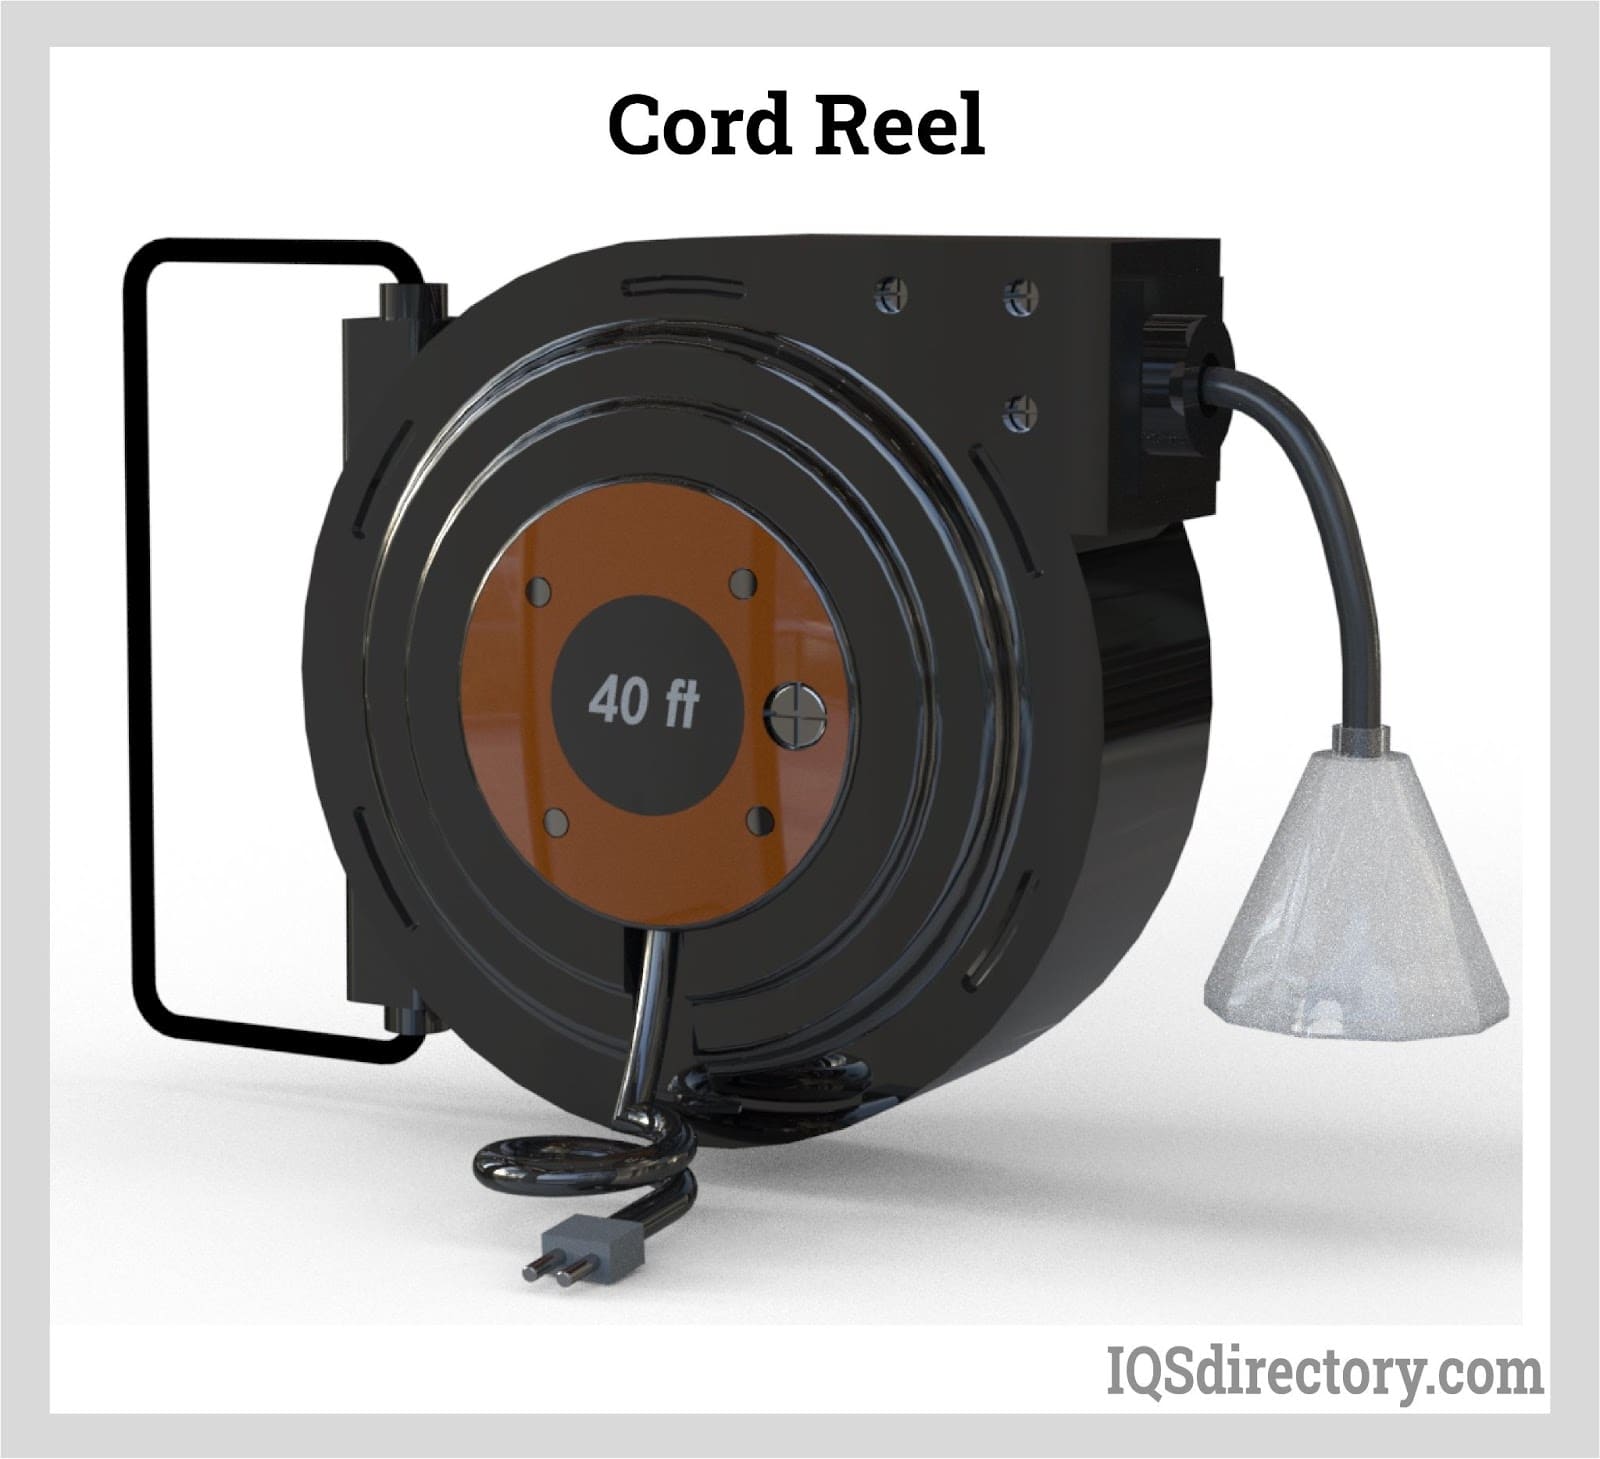 Extension Cord Reel Cable Extension Cord Electric Cord Reel Hose Reels  Spool for Braided Cord Extension Cord Reel Cable Reel Cord Storage Reel  Cable